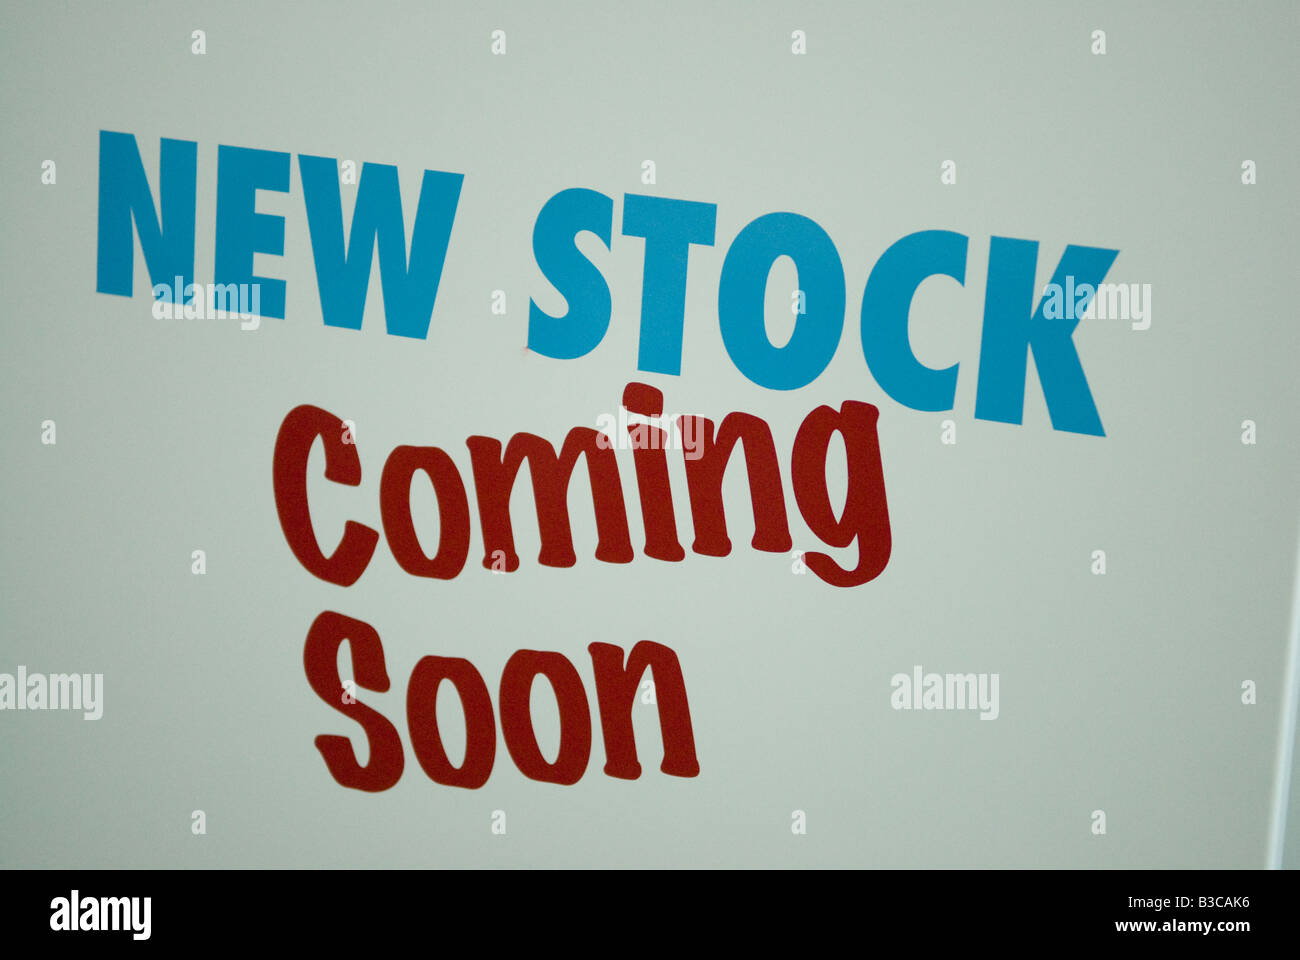 New Stock Coming Soon sign Stock Photo